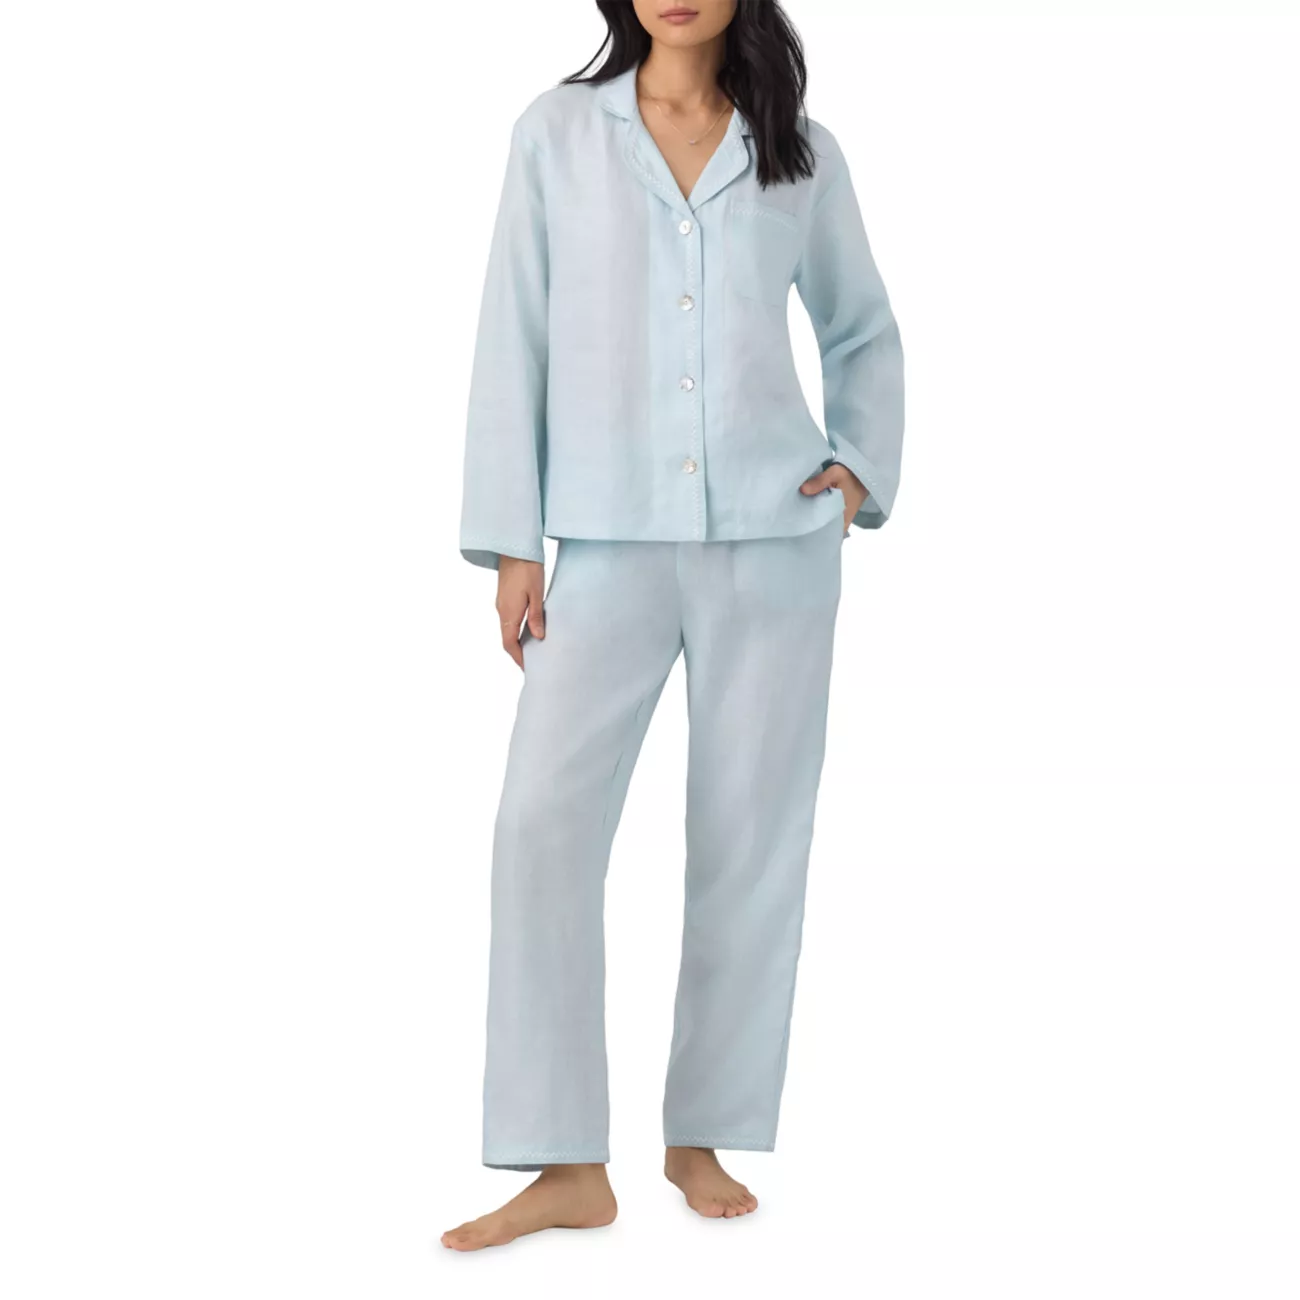 Embroidered Linen Pajamas BedHead